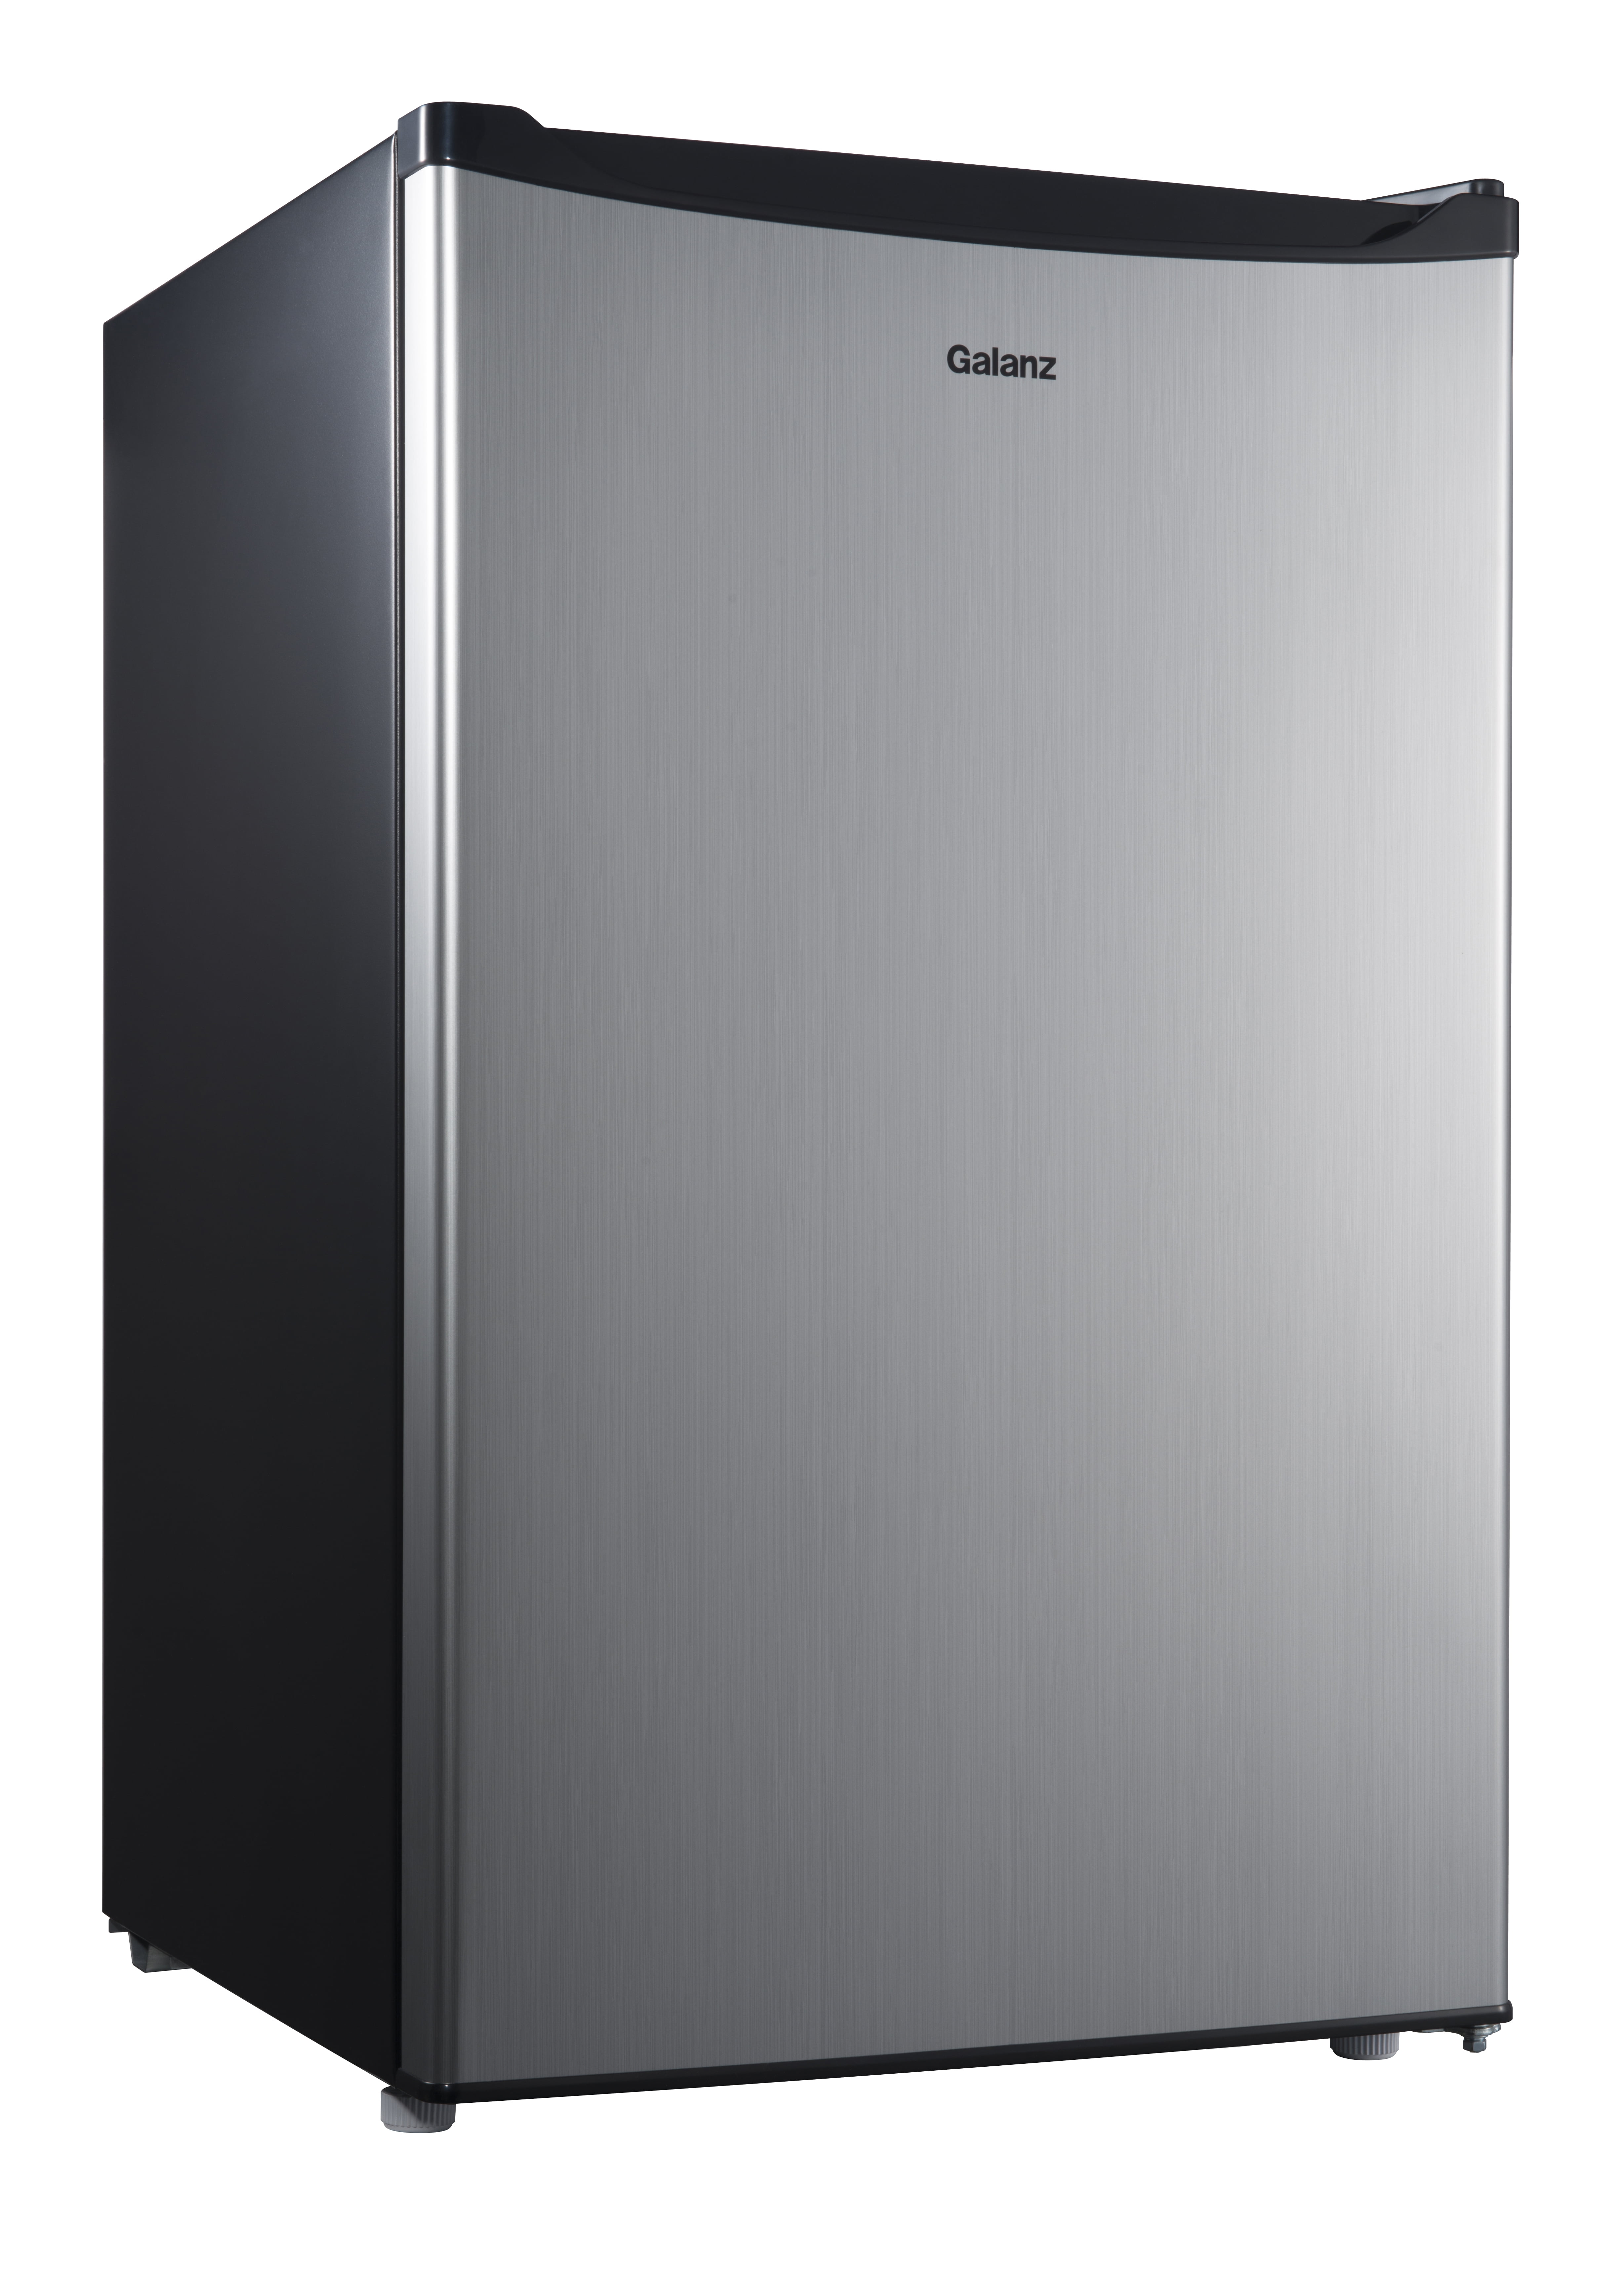 Rent to Own Insignia Insignia™ - 3.3 Cu. Ft. Mini Fridge - Black at Aaron's  today!